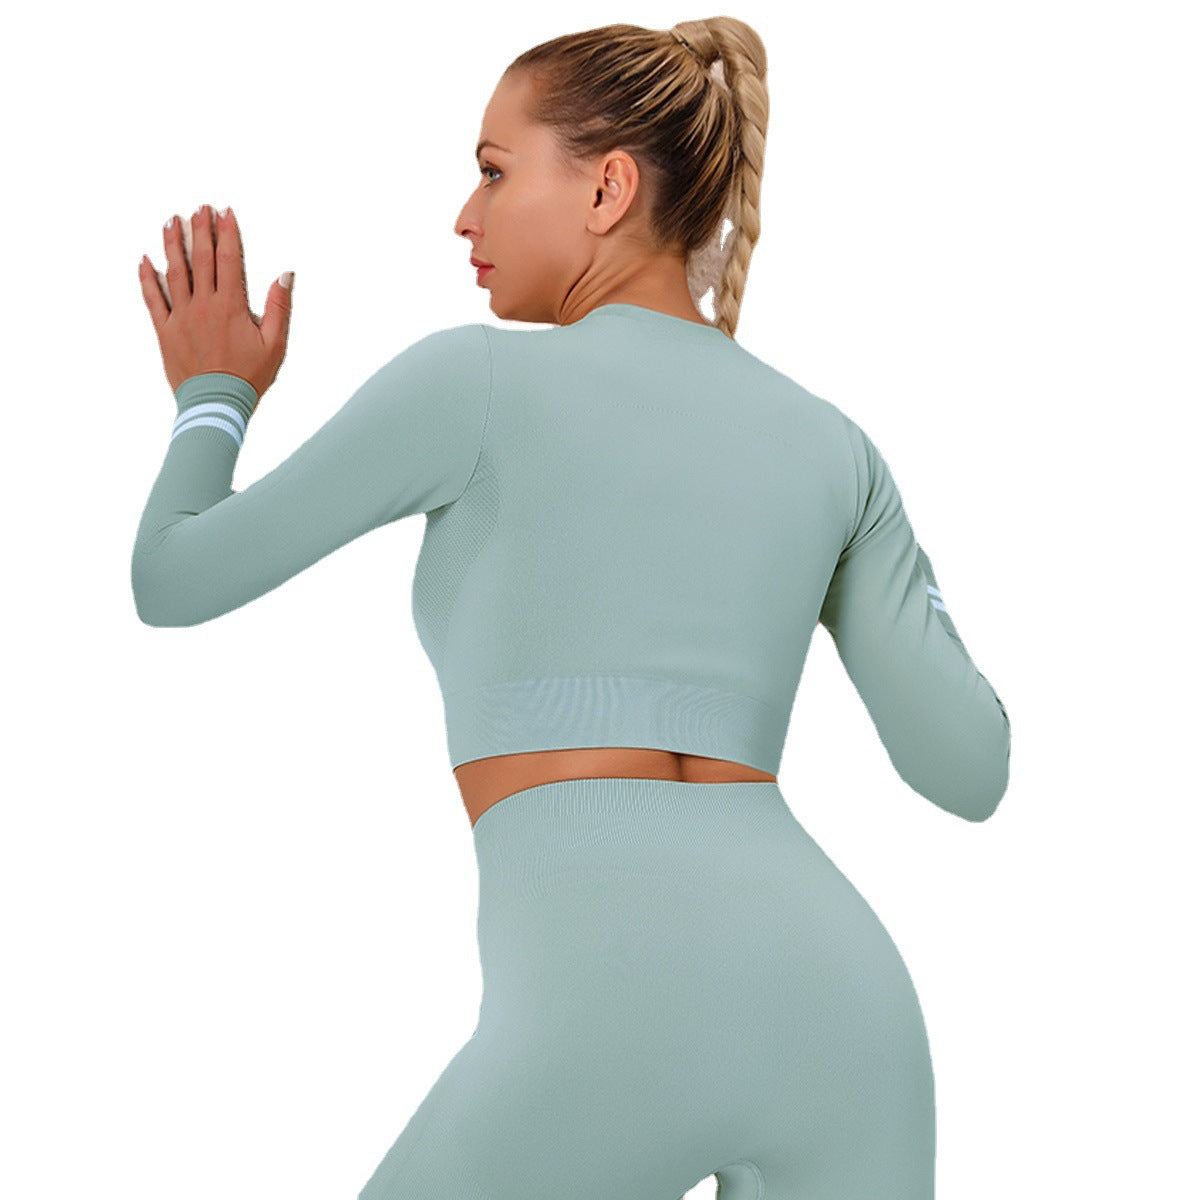 Long-Sleeved Sports Zipper Top Breathable Cooldry Skinny Running Yoga Clothes Fitness Clothes for Women